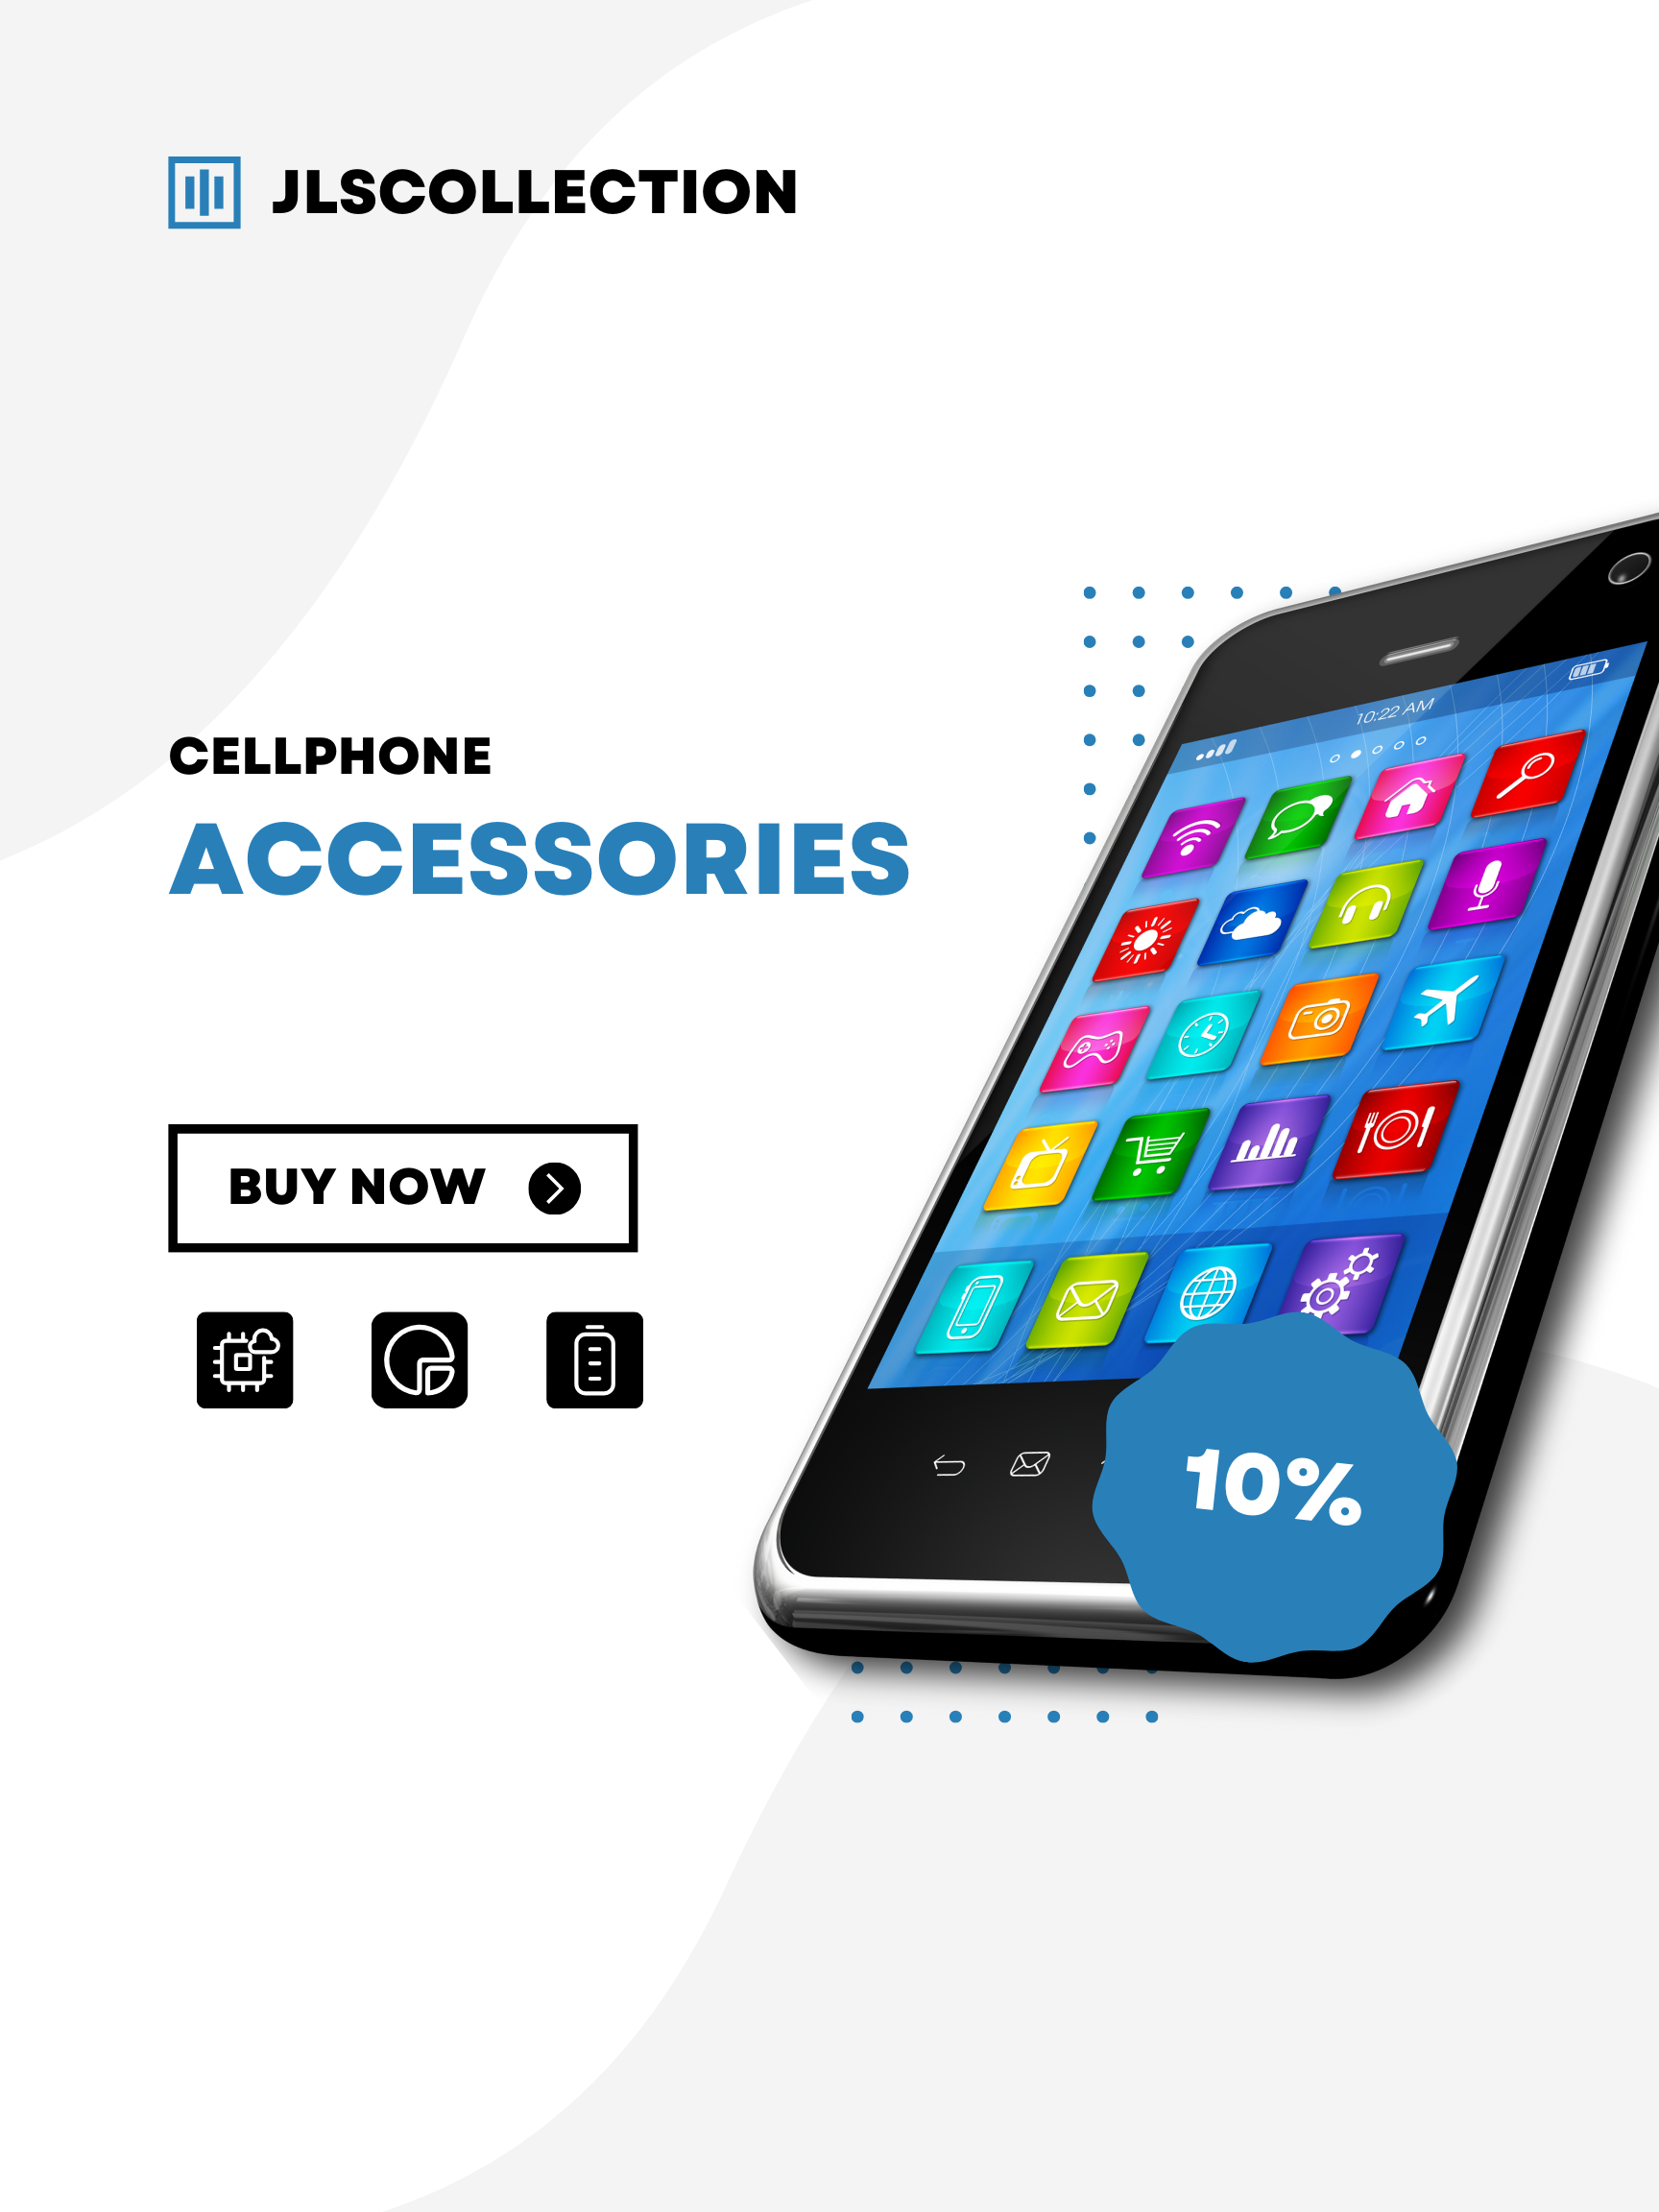 Cellphone and accessories